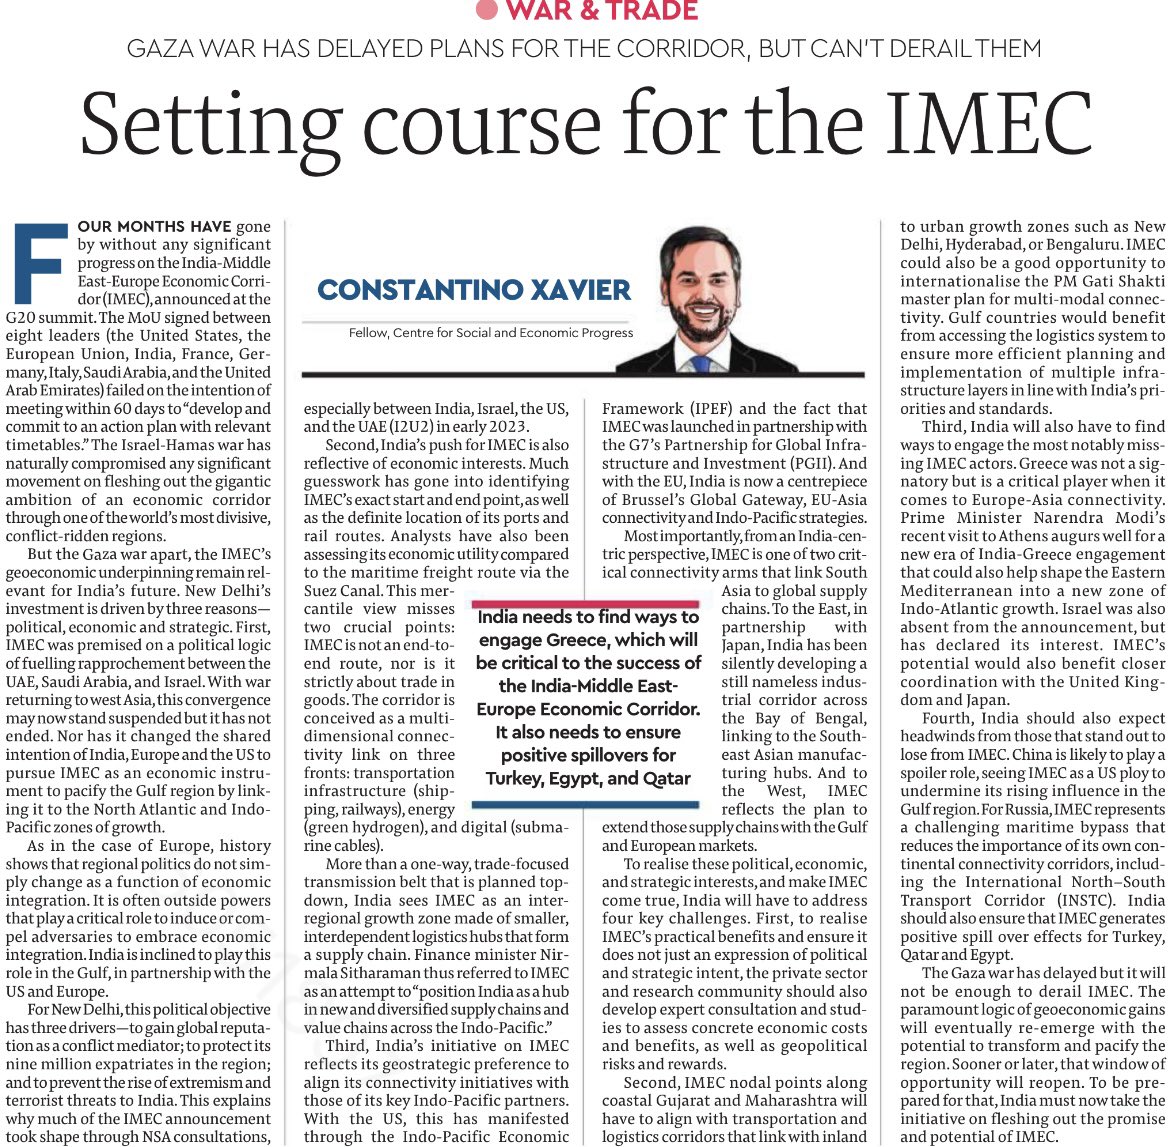 IMEC back in the limelight at Raisina Dialogue and with Greek PM in Delhi. Huge potential for EU-India connectivity partnership. Important to understand the interests driving India’s participation and challenges ahead: financialexpress.com/opinion/settin…